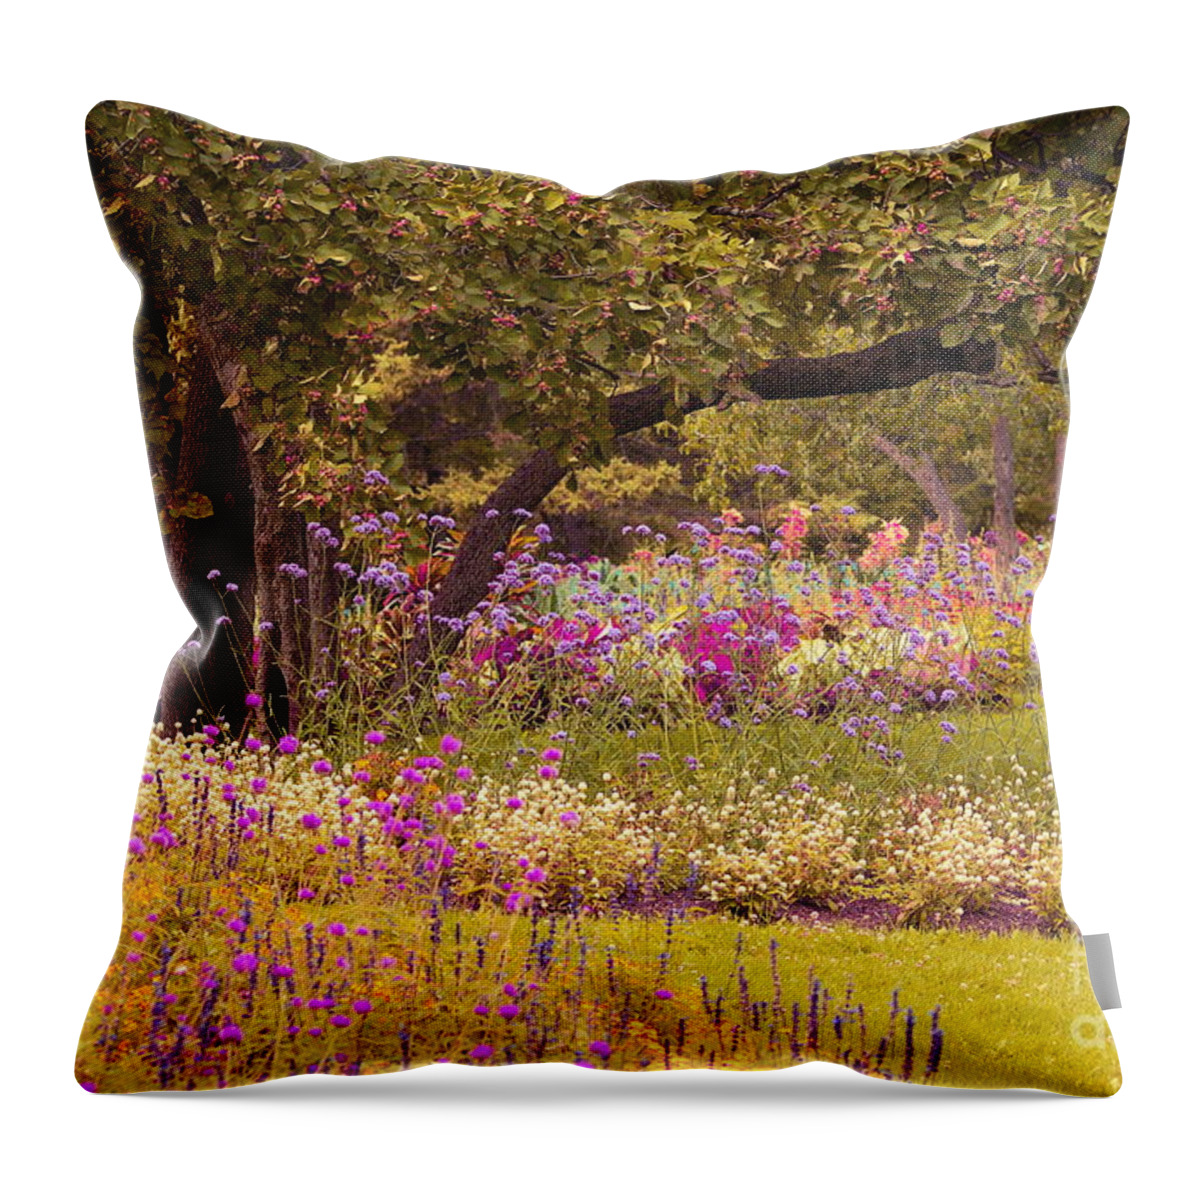 Tree Throw Pillow featuring the photograph Romanesquerie by Aimelle Ml